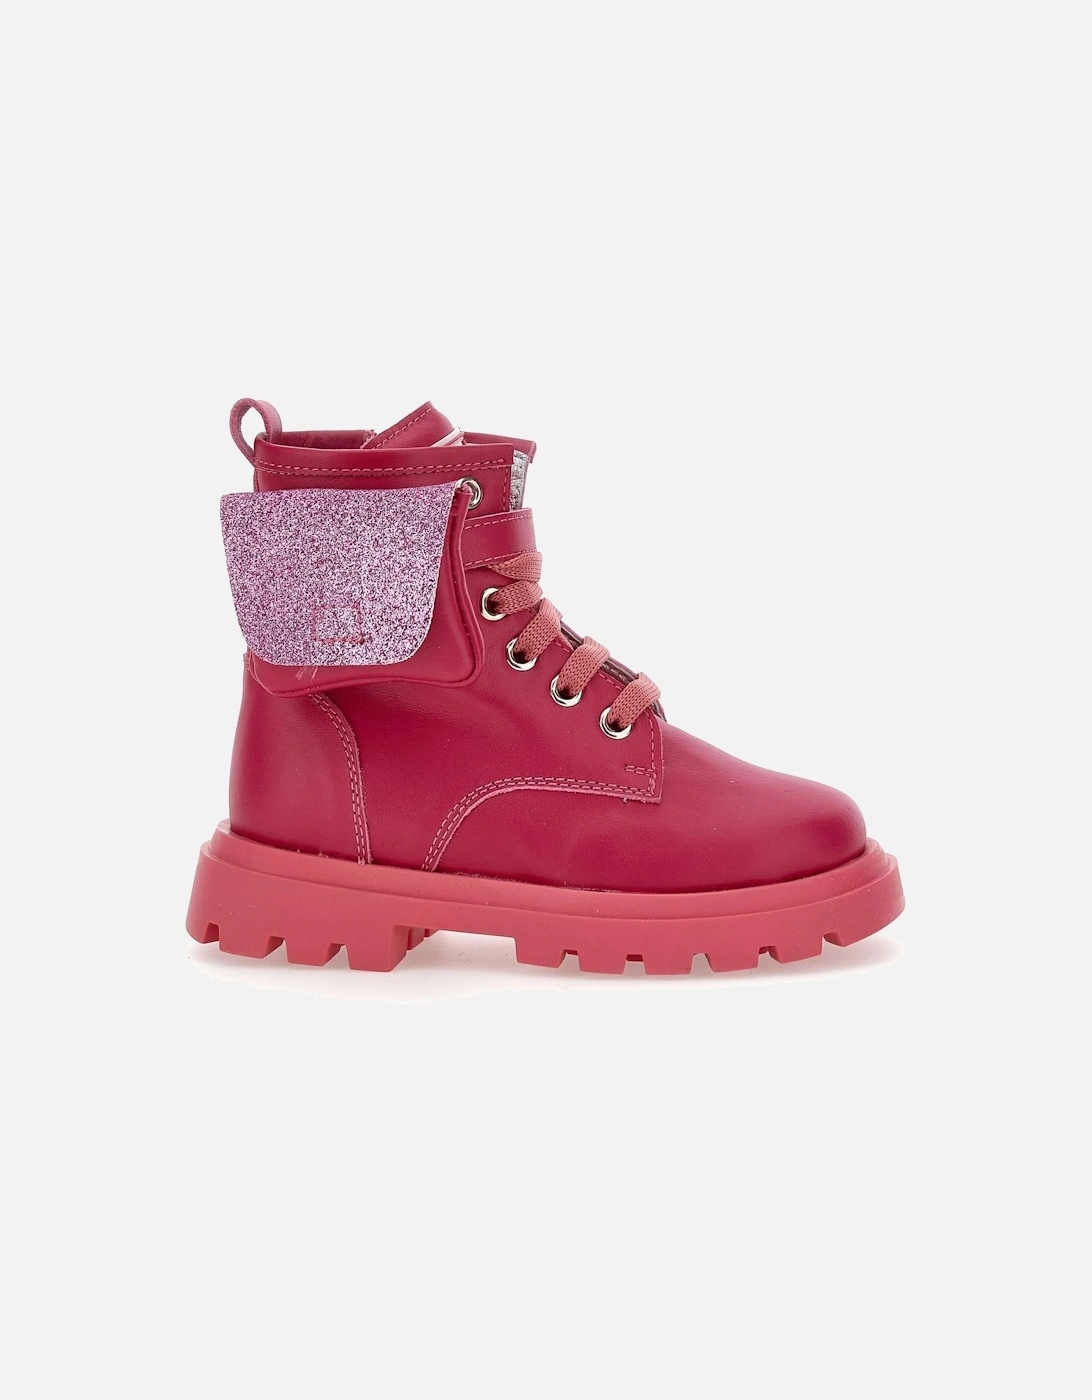 Girls Pink Pocket Leather boots